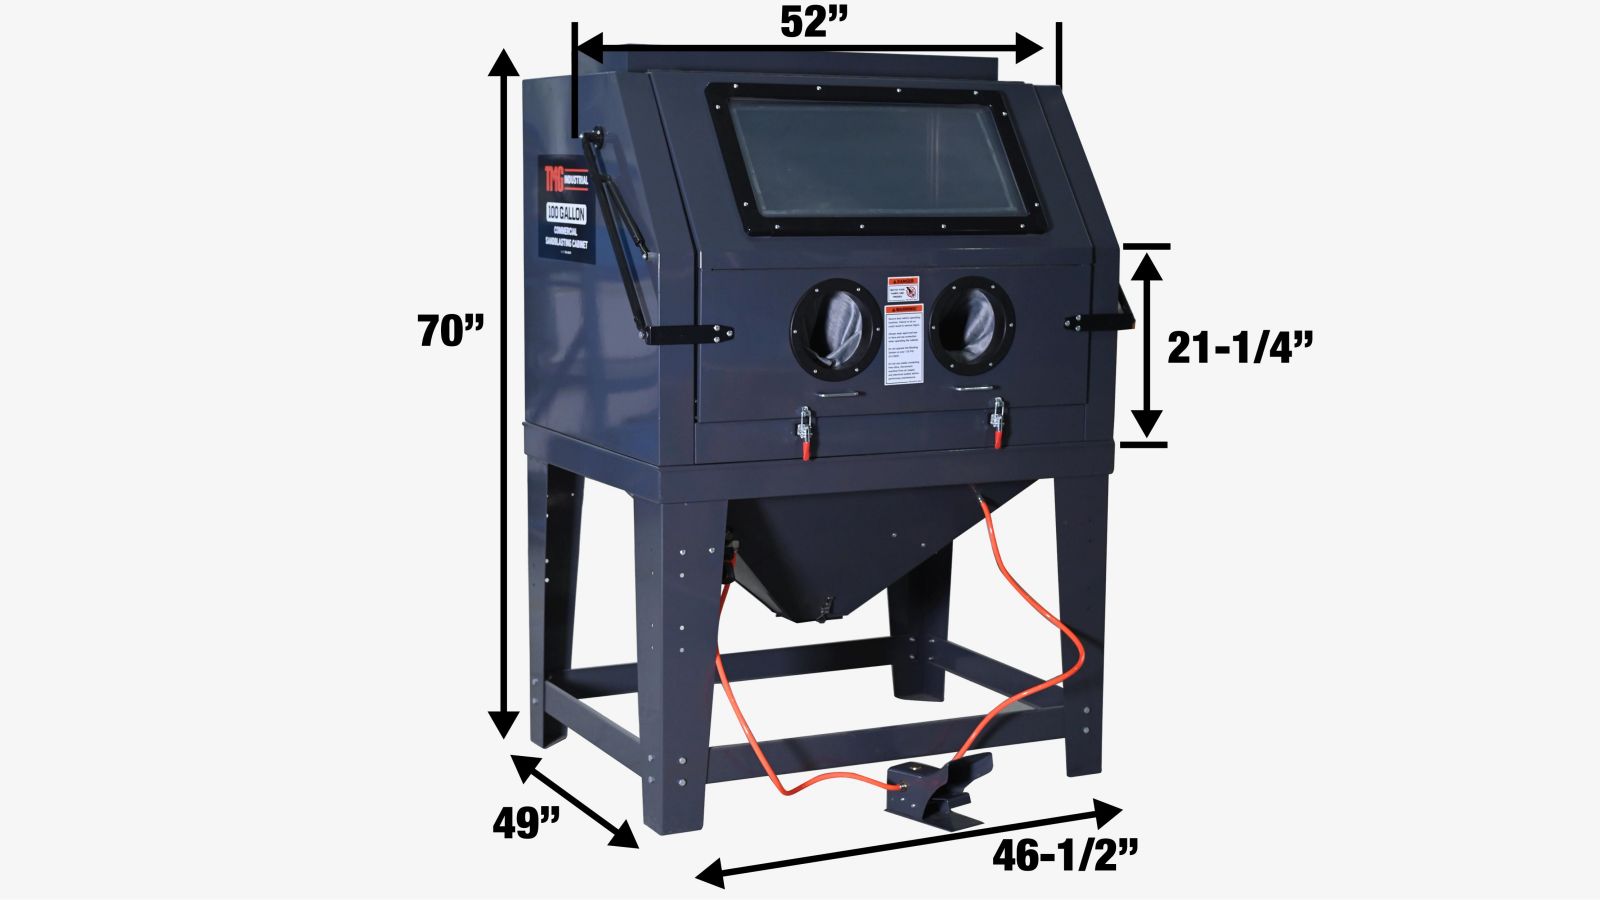 TMG Industrial 265 Gallon/990L Commercial Cabinet Sandblaster, Vacuum Filtration System, Oversized View Window, 125 PSI, 24 CFM, TMG-ABC99-specifications-image